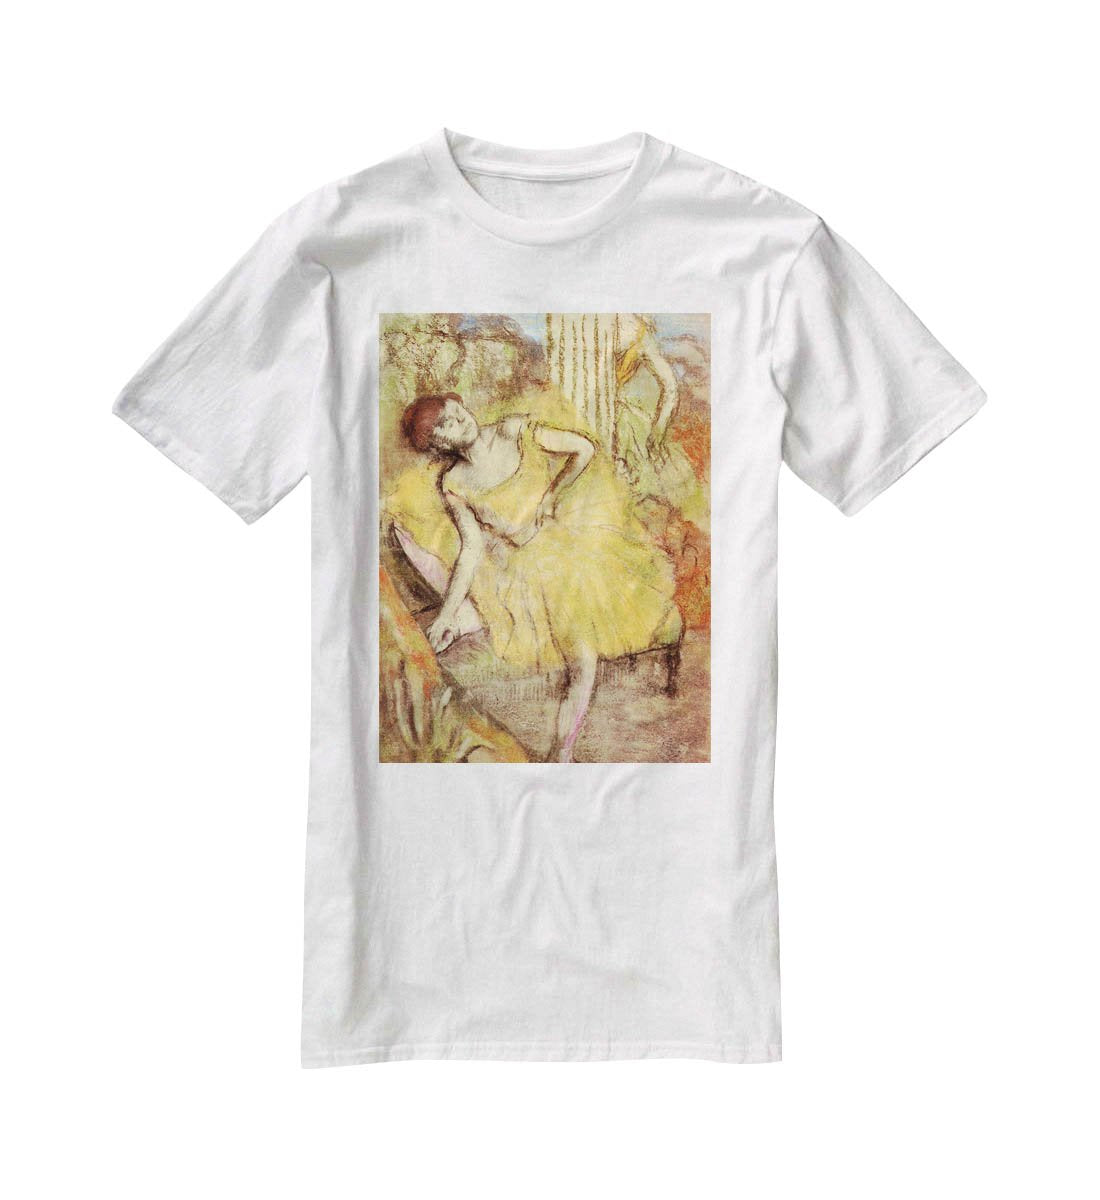 Sitting dancer with the right leg up by Degas T-Shirt - Canvas Art Rocks - 5